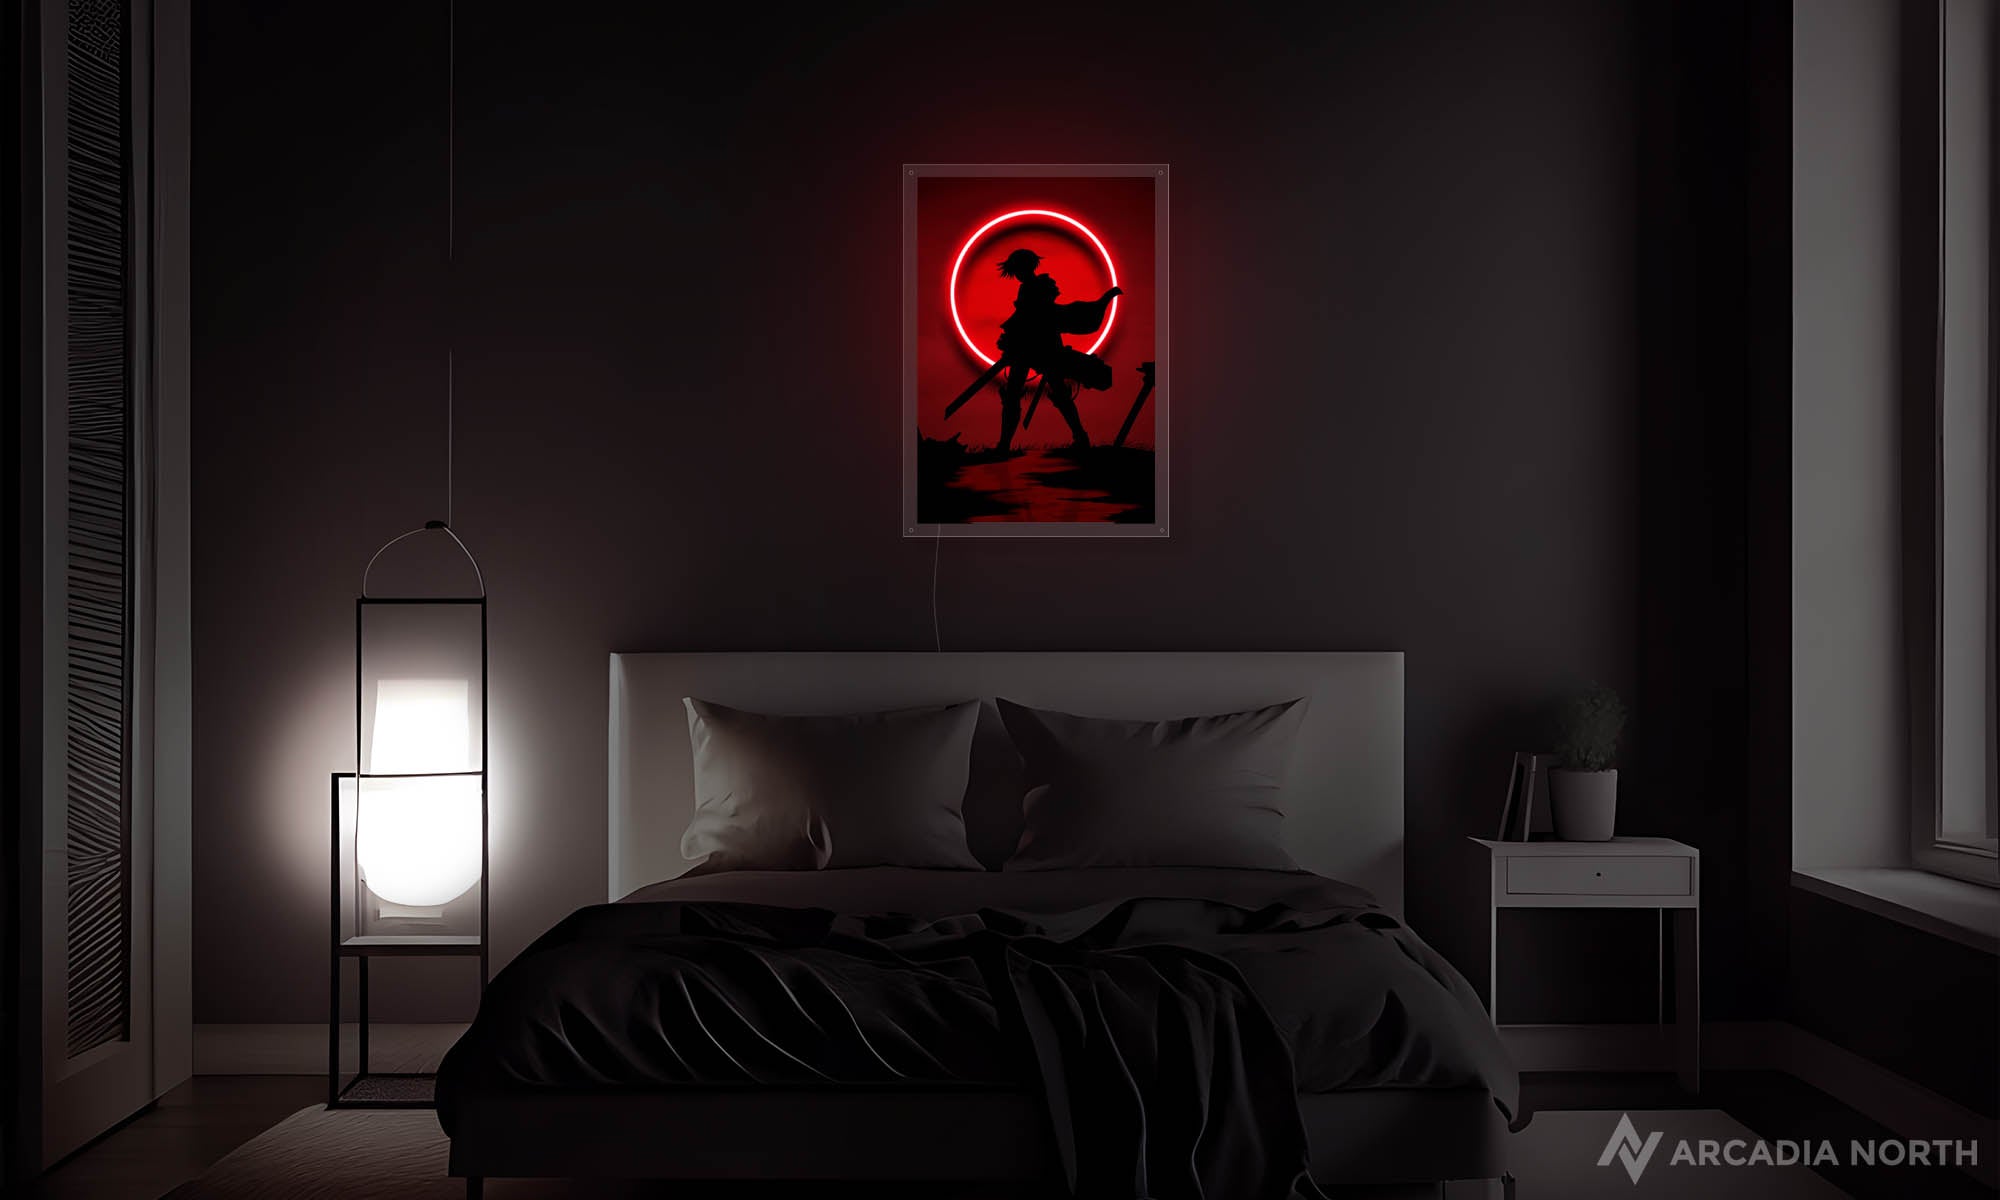 Modern bedroom with an Attack on Titan poster with Levi Ackerman's silhouette in front of a red moon outlined by neon lights above the bed - UV printed on acrylic - an Arcadia North Original LED Poster